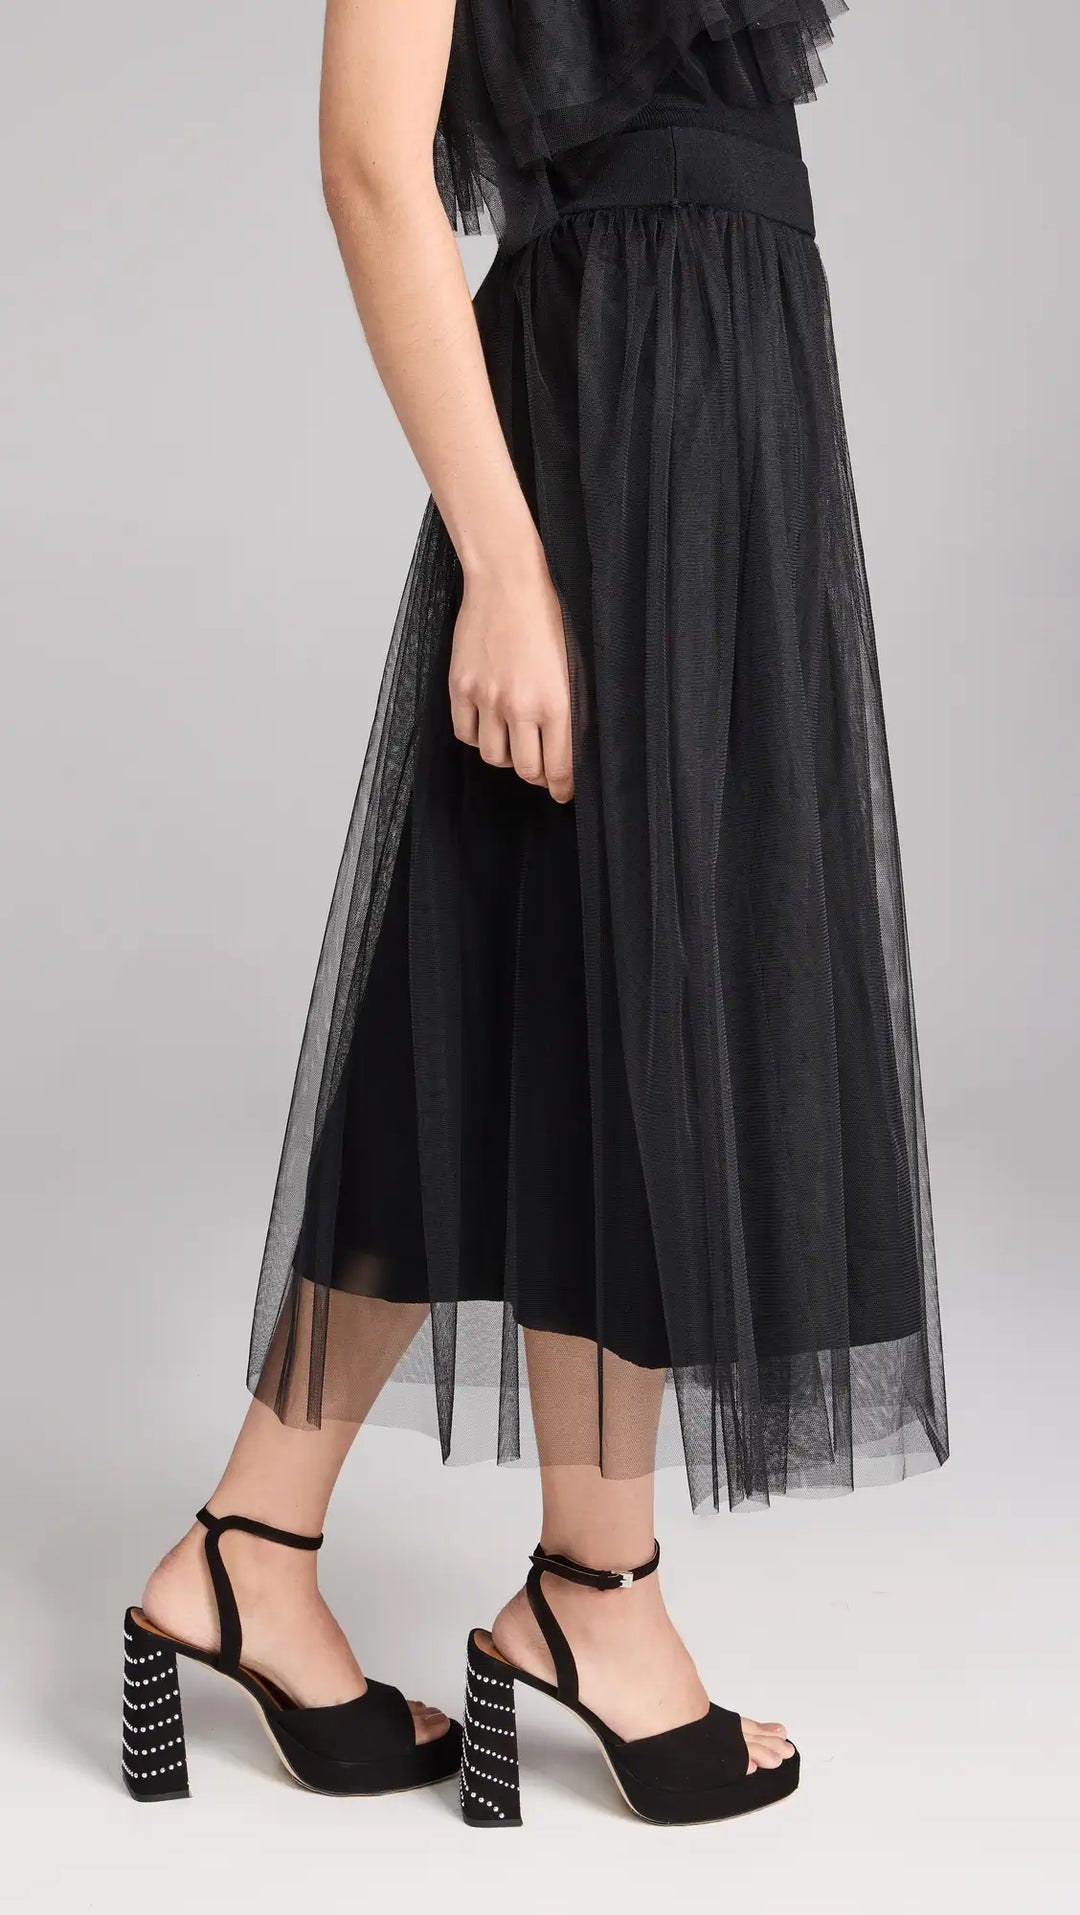 Autumn Cashmere Gathered Skirt with Tulle